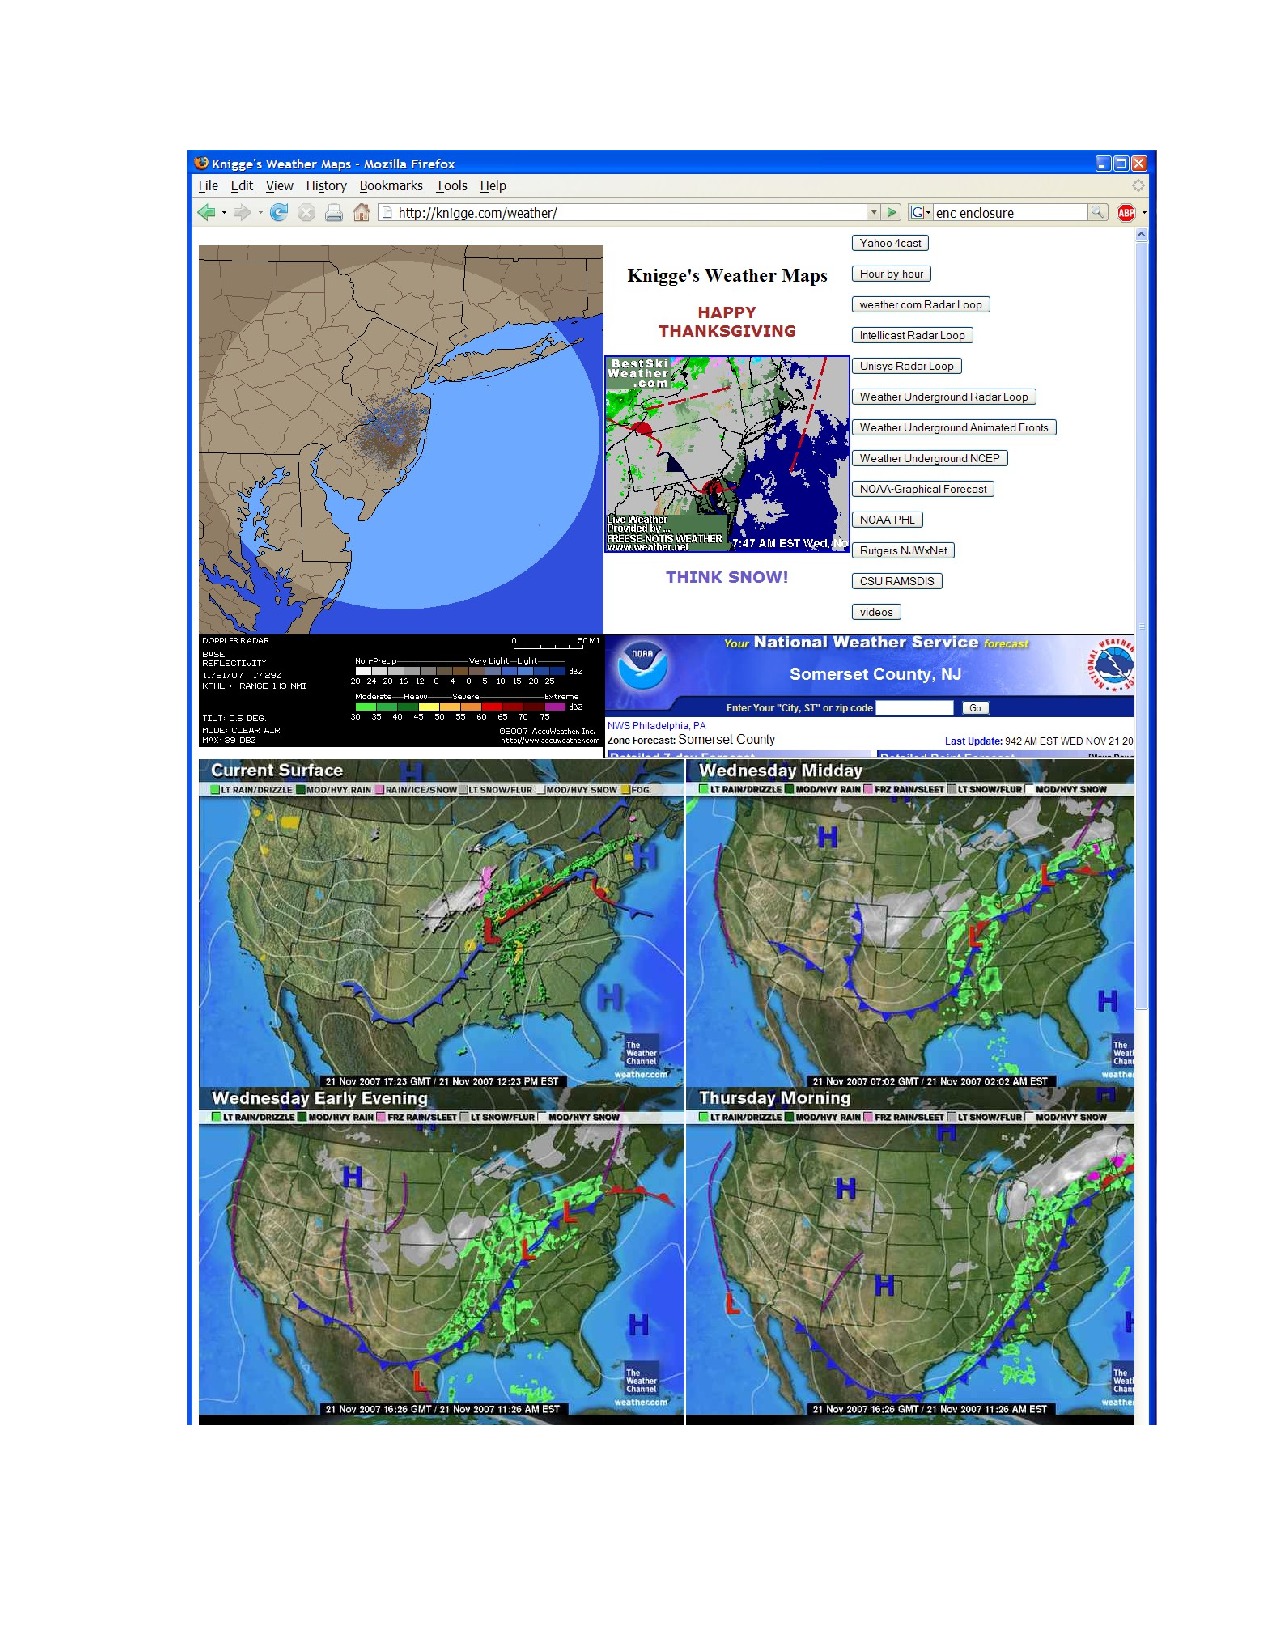 Knigge's_weather_maps